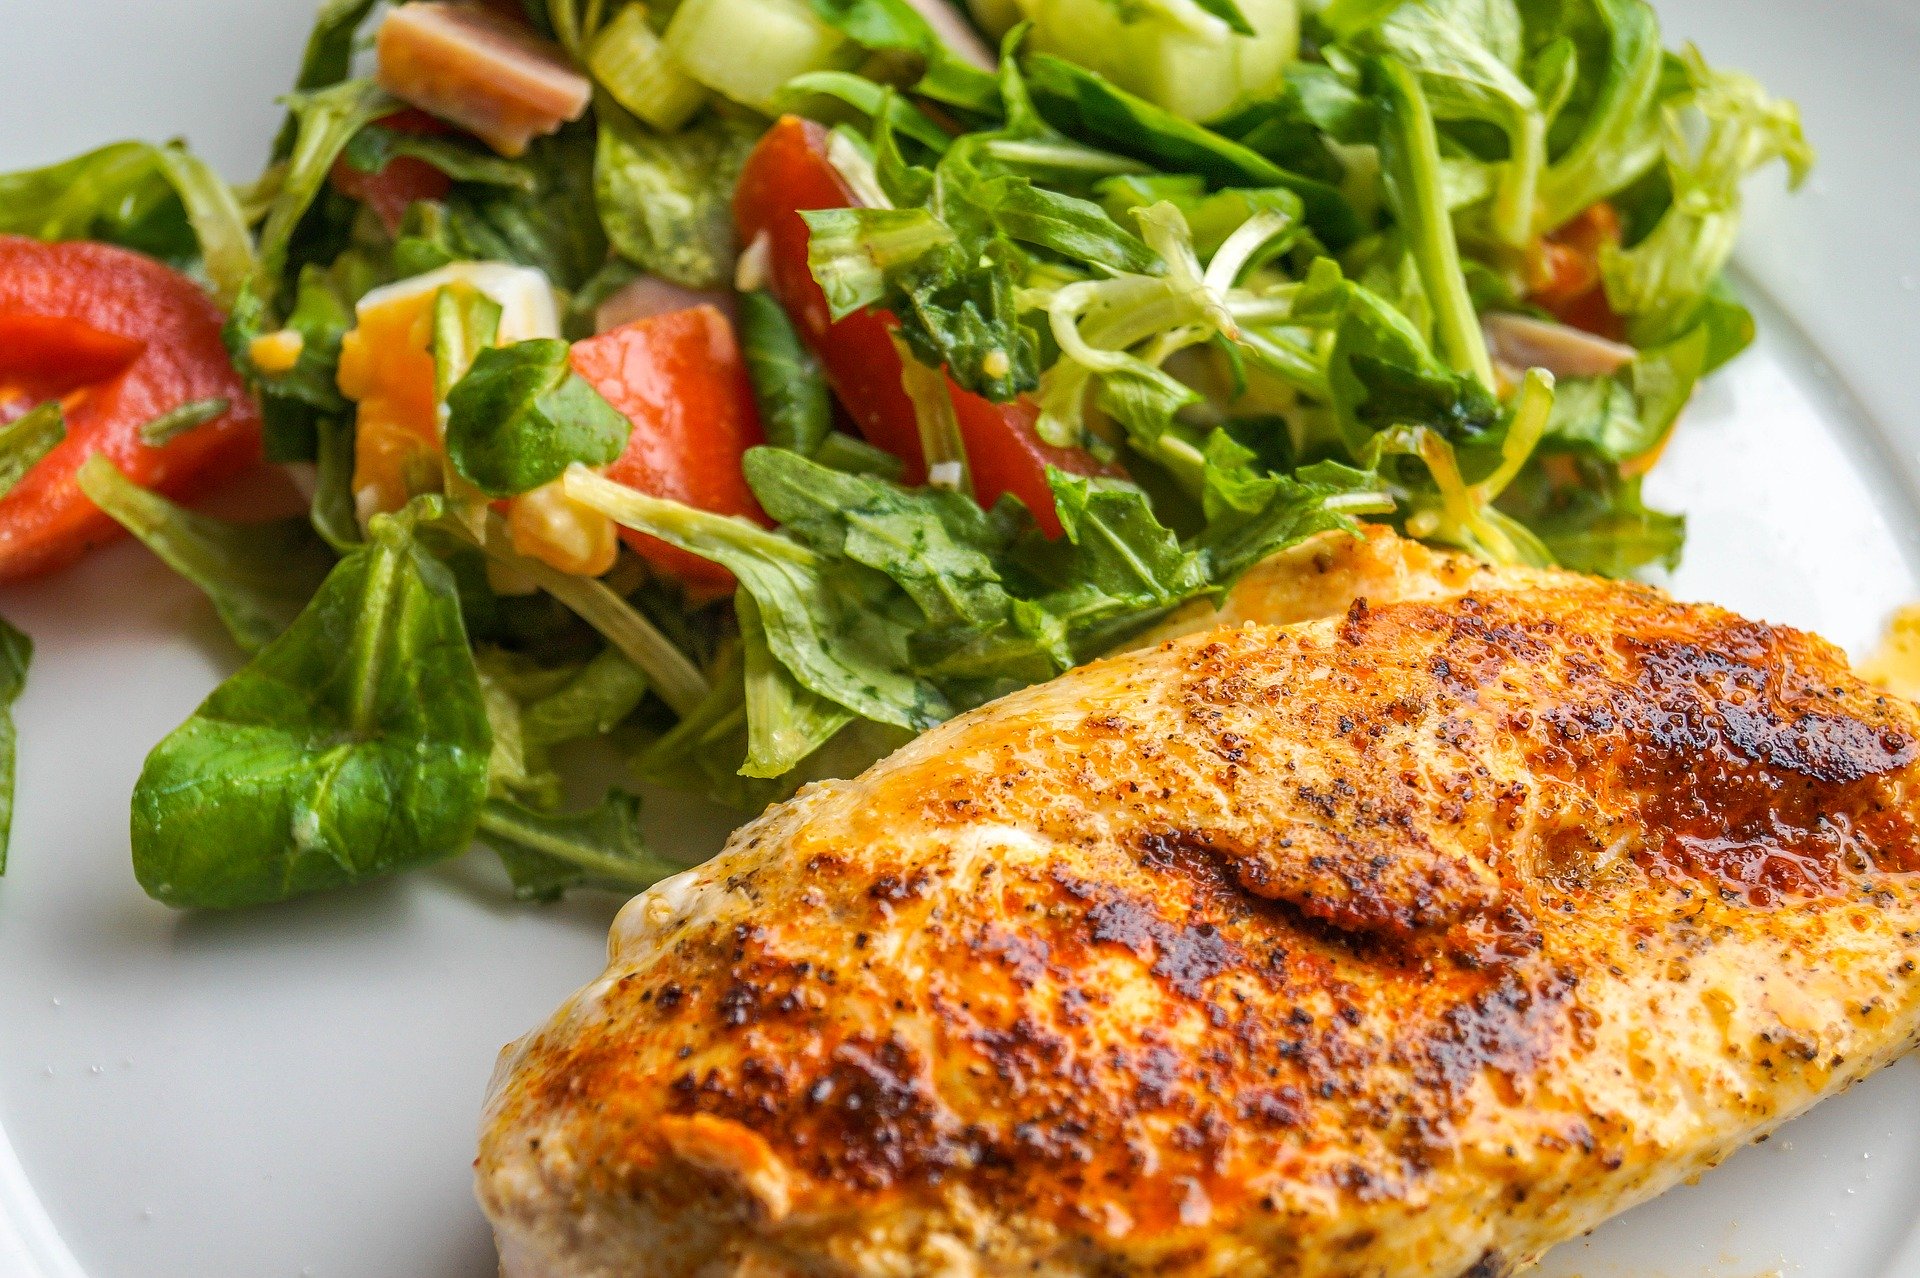 chicken breast filet and salad